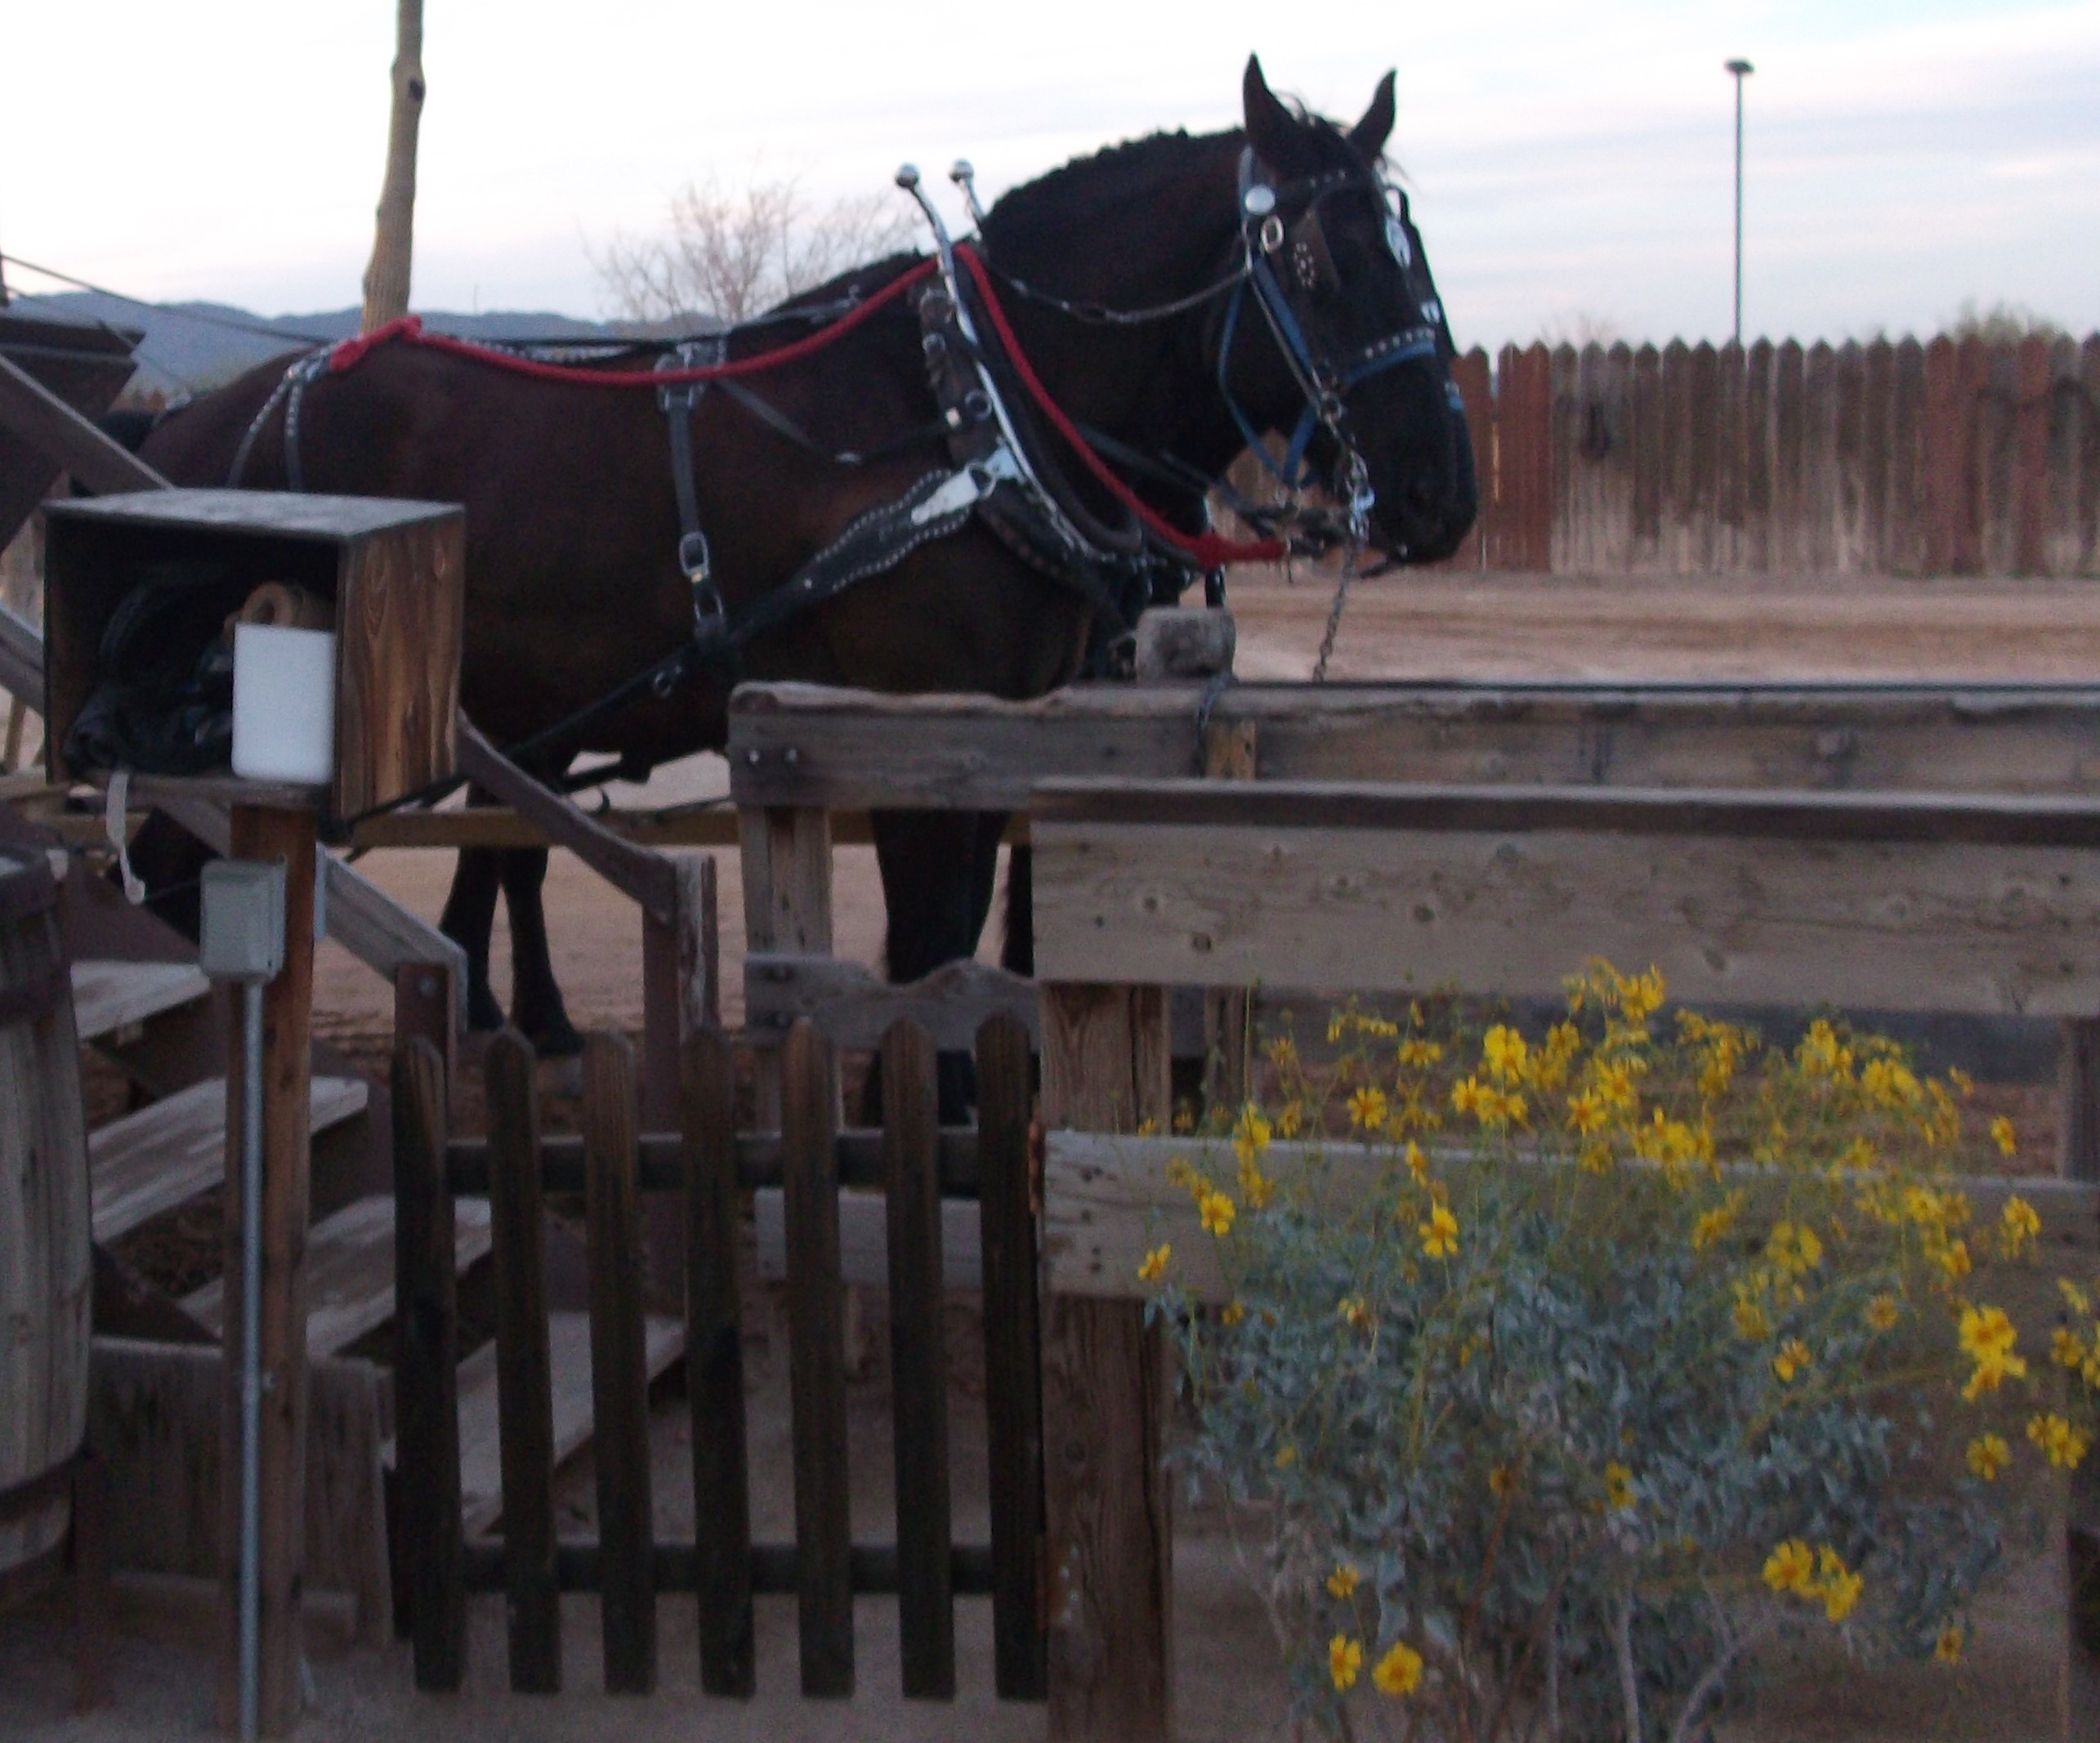 Here are the horses that pulled the stagecoach. According to the website, the stagecoach is now pulled by mules.